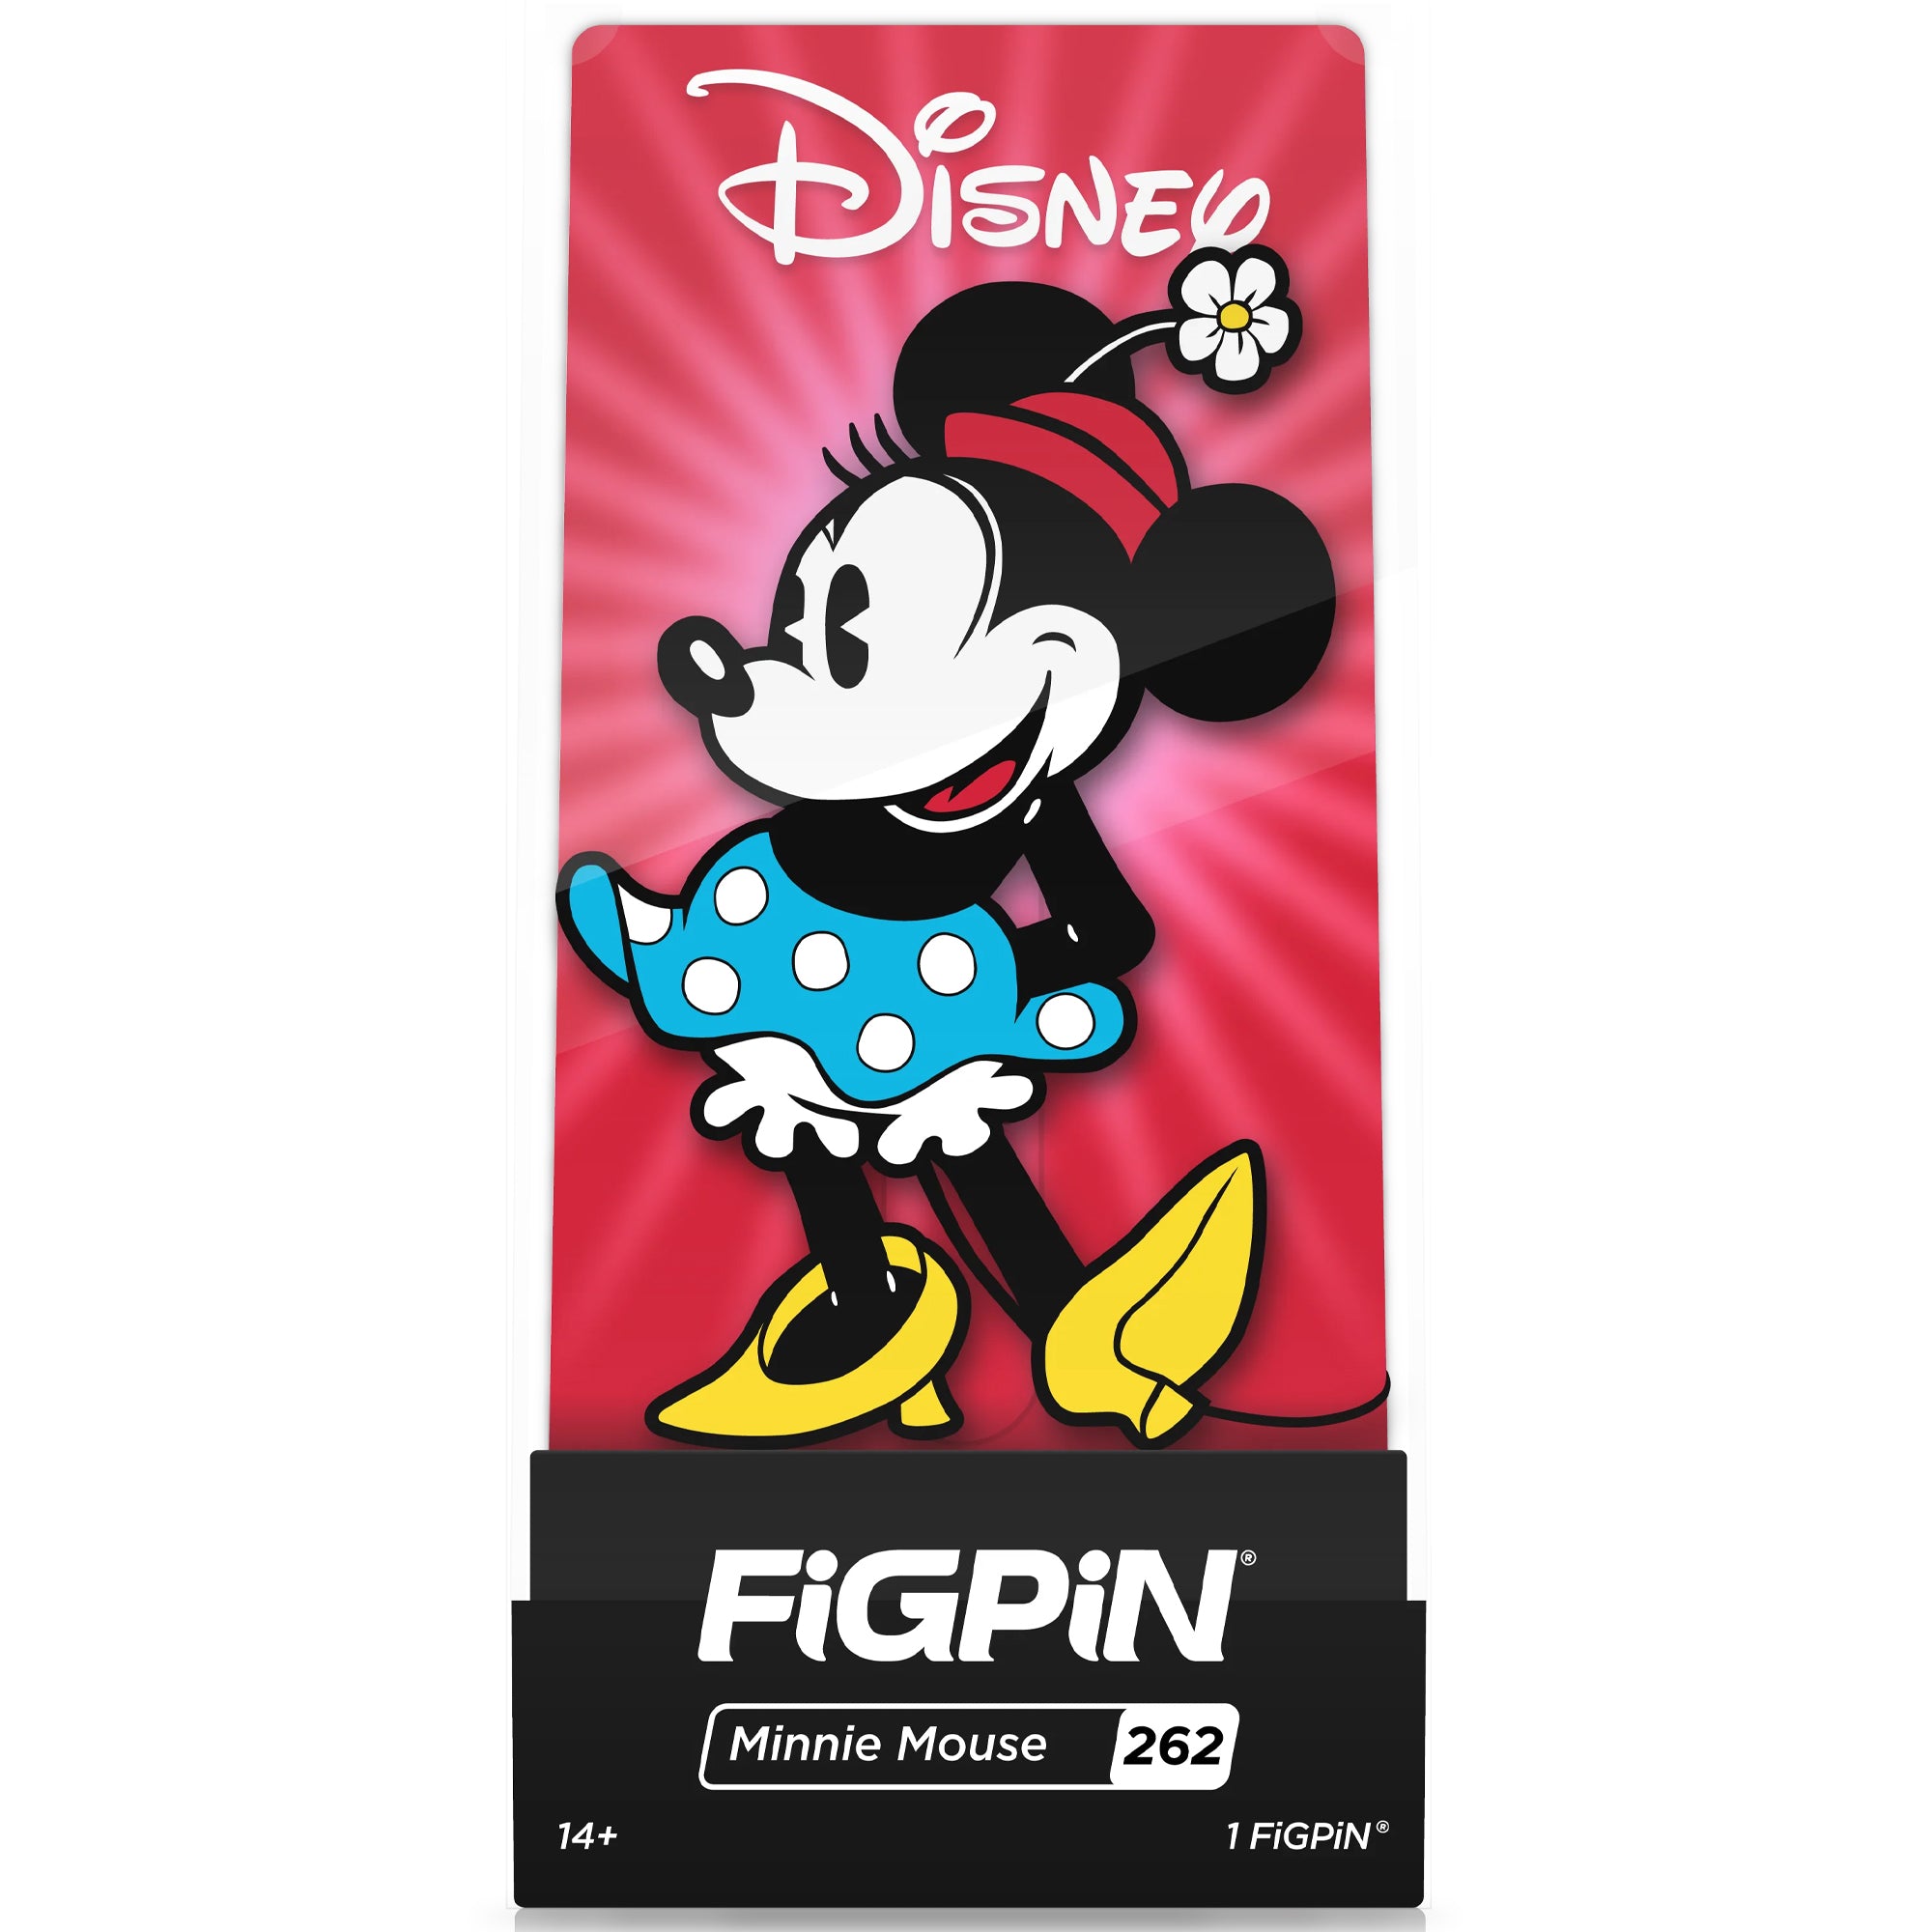 Disney Minnie Mouse 3" Collectible Pin #262